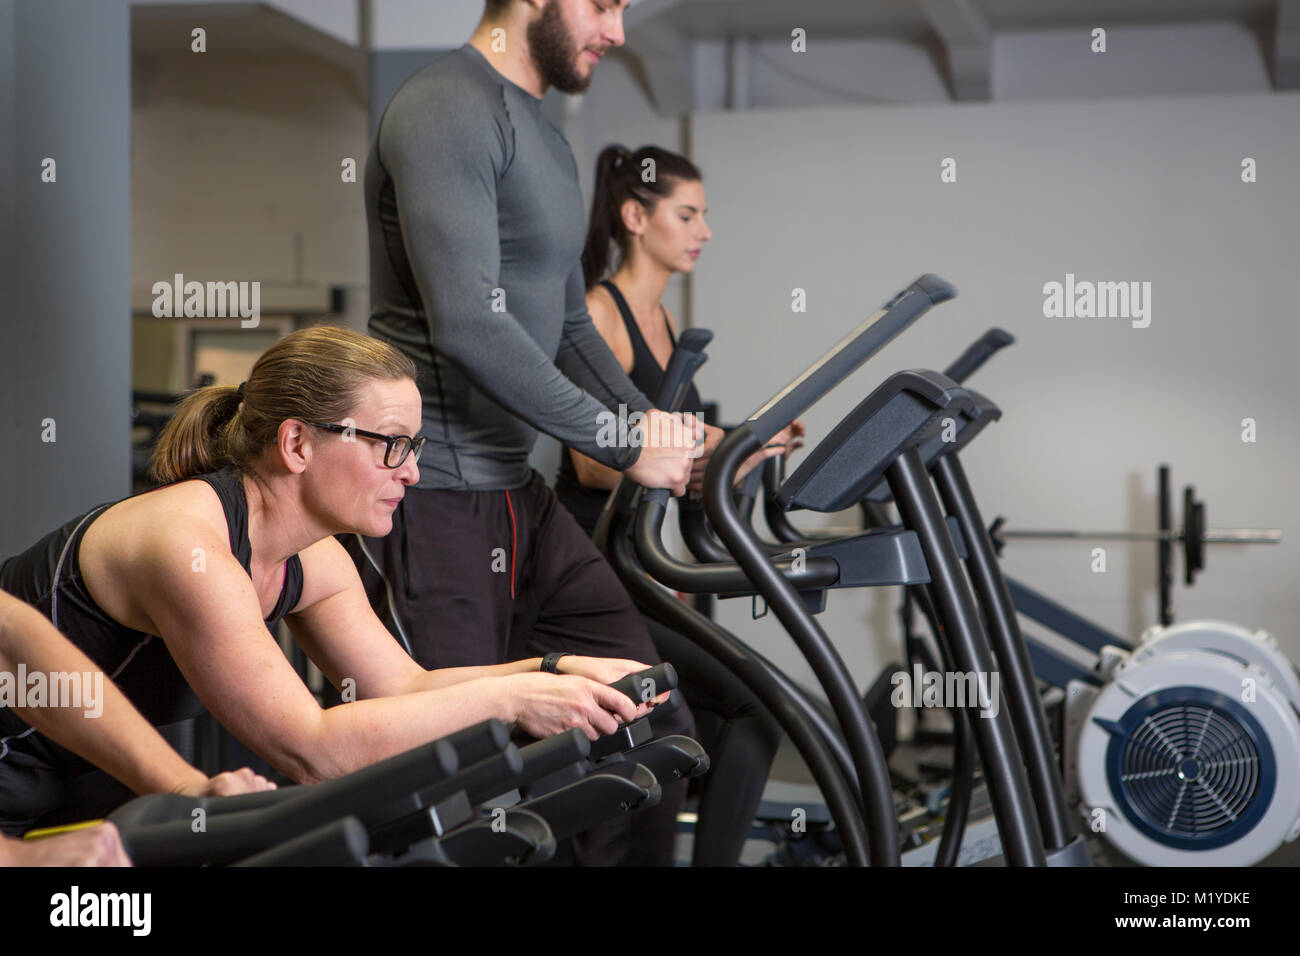 Three women and one man training at a gym in cardio machines. They all have happy expressions. Stock Photo